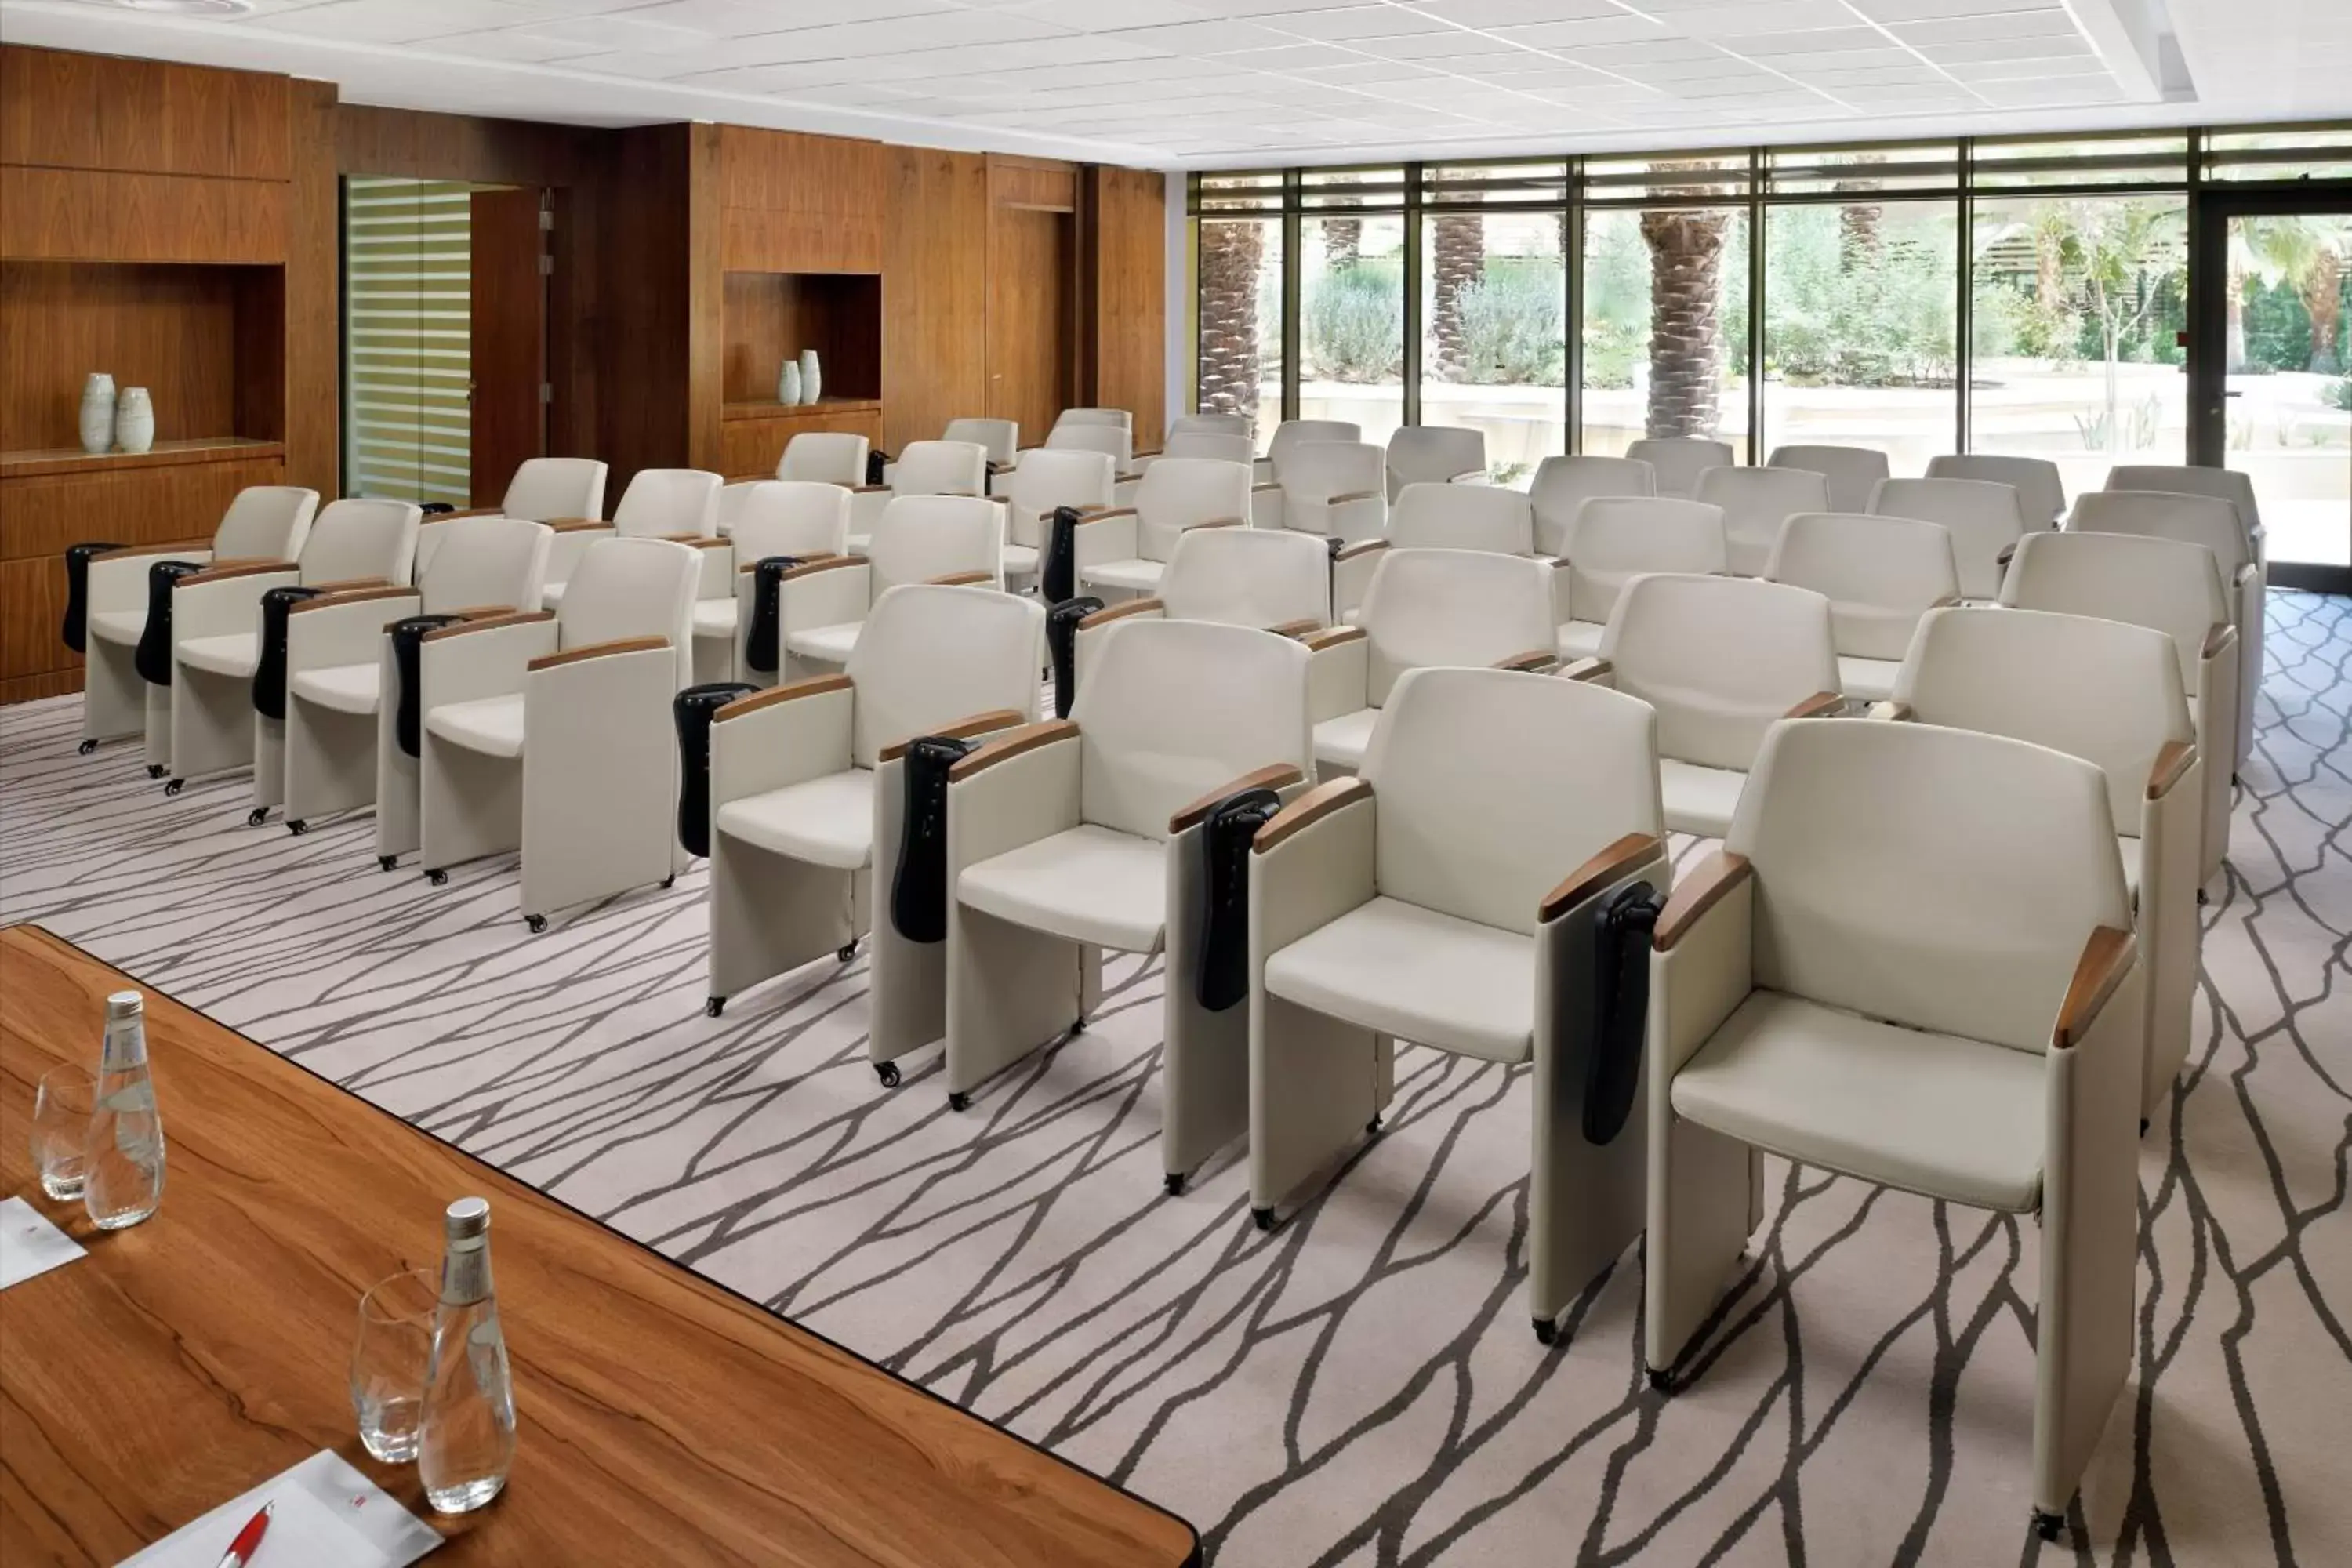 Meeting/conference room in Marriott Riyadh Diplomatic Quarter